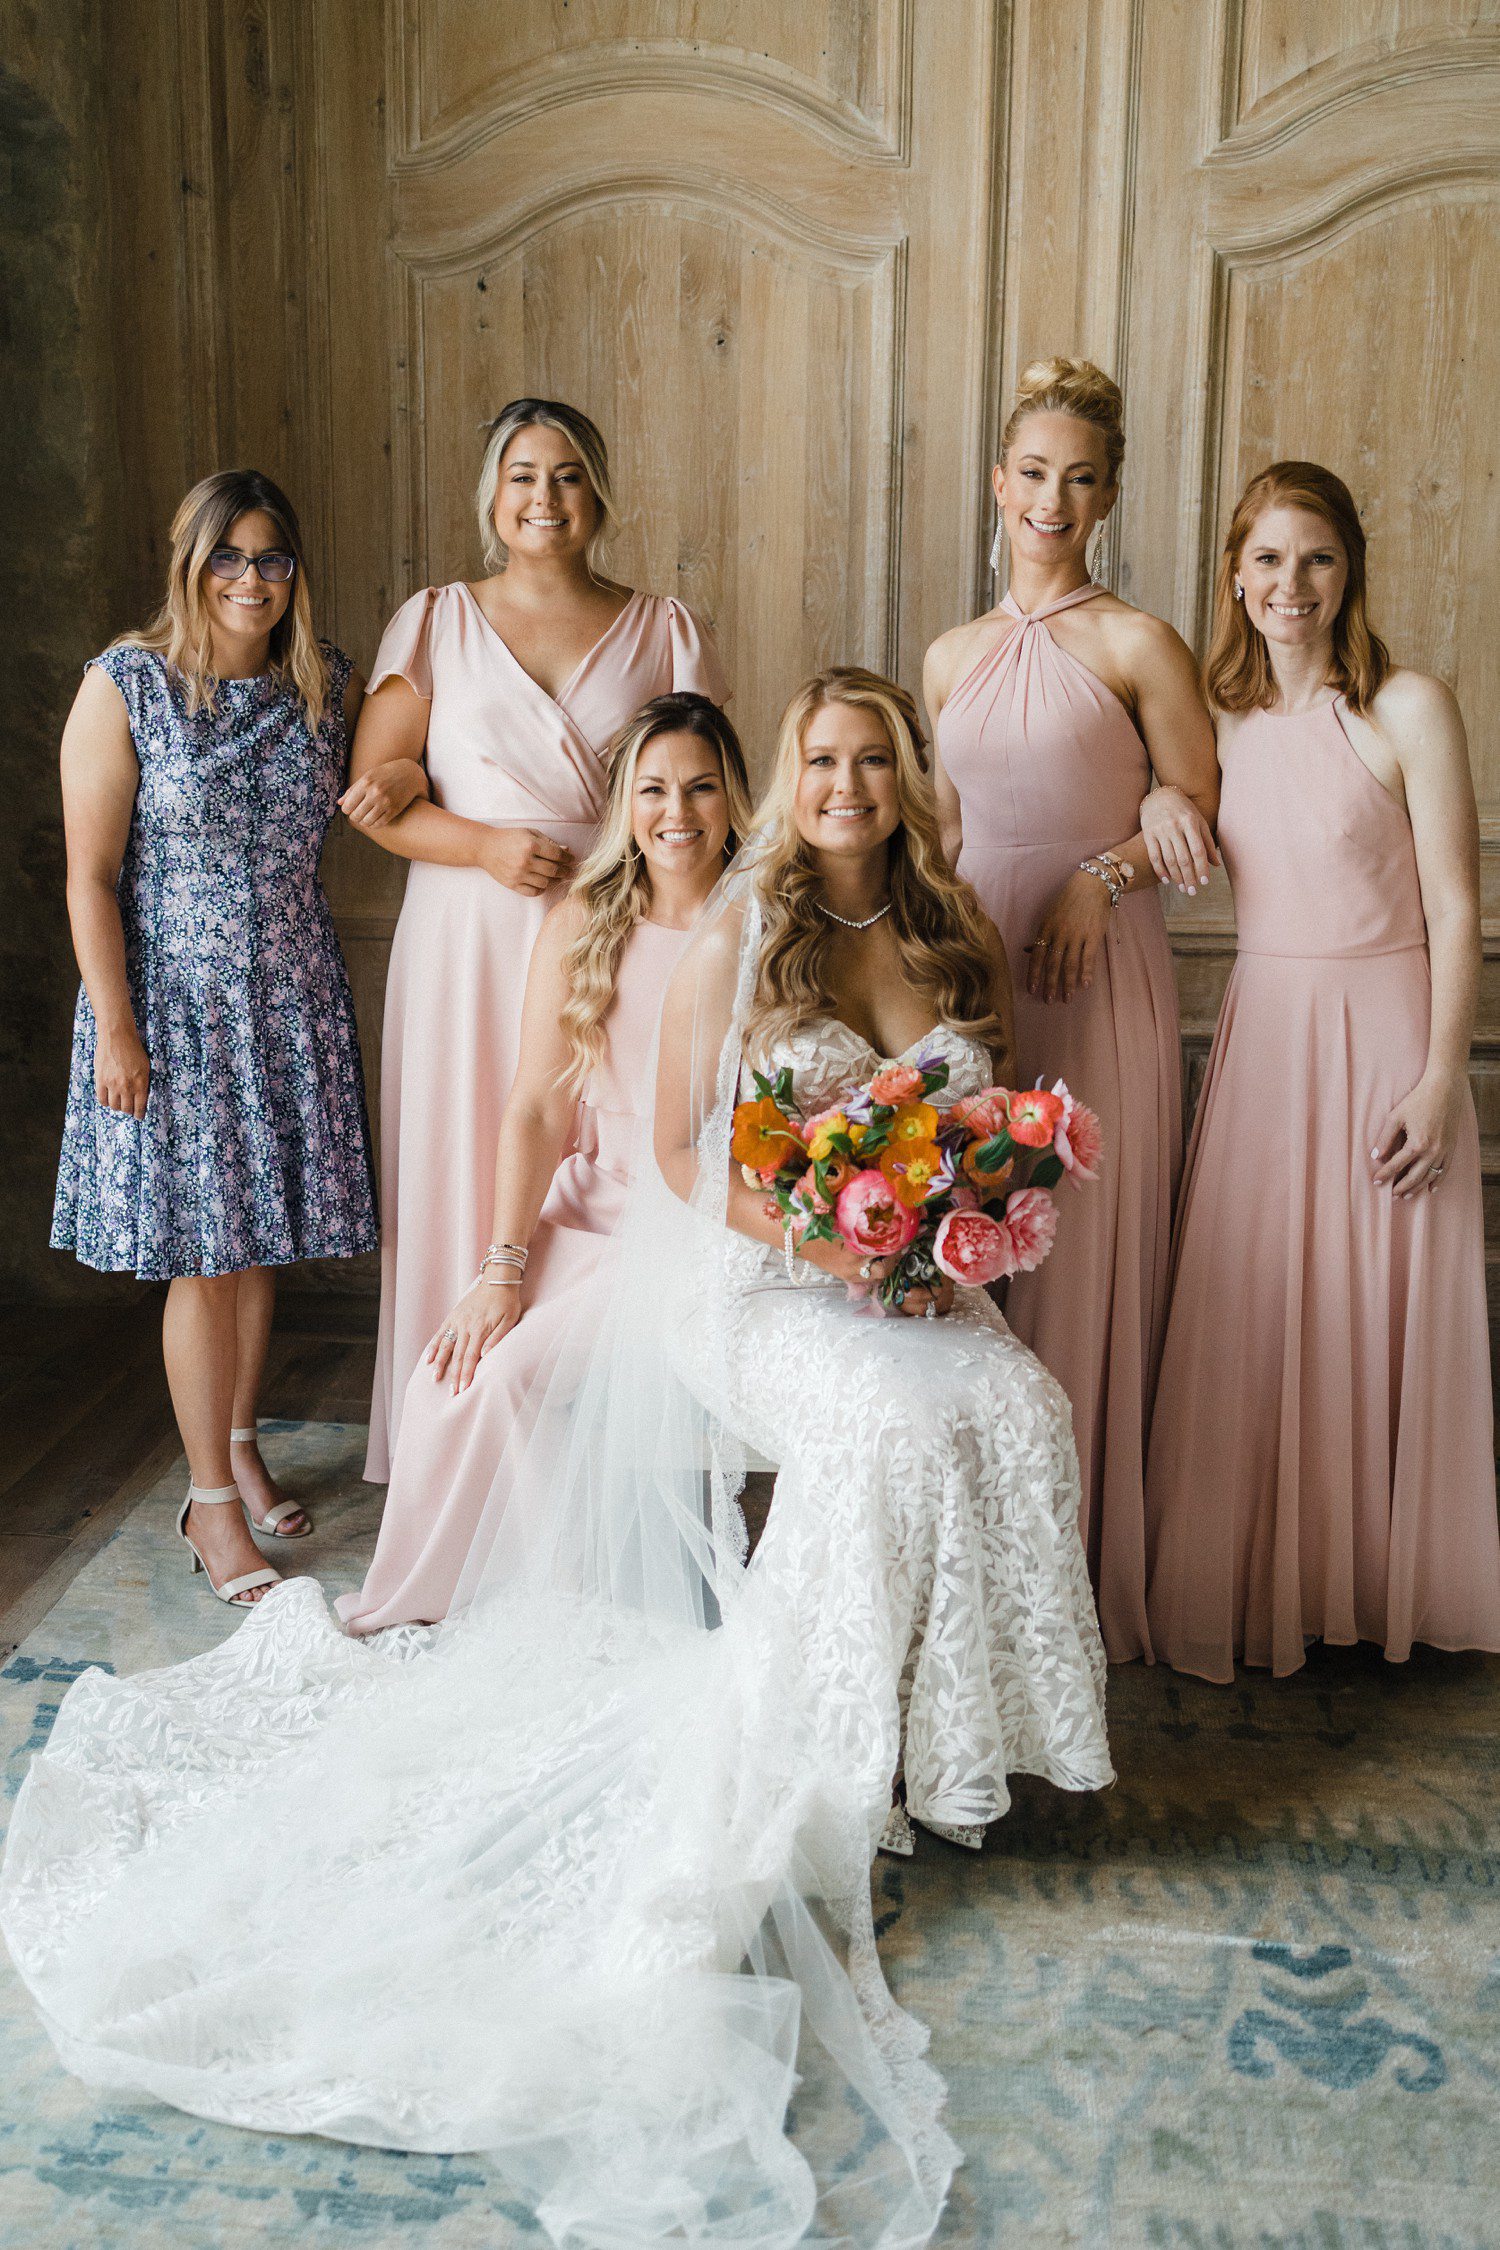 Bride and bridesmaid photos in pink dresses.